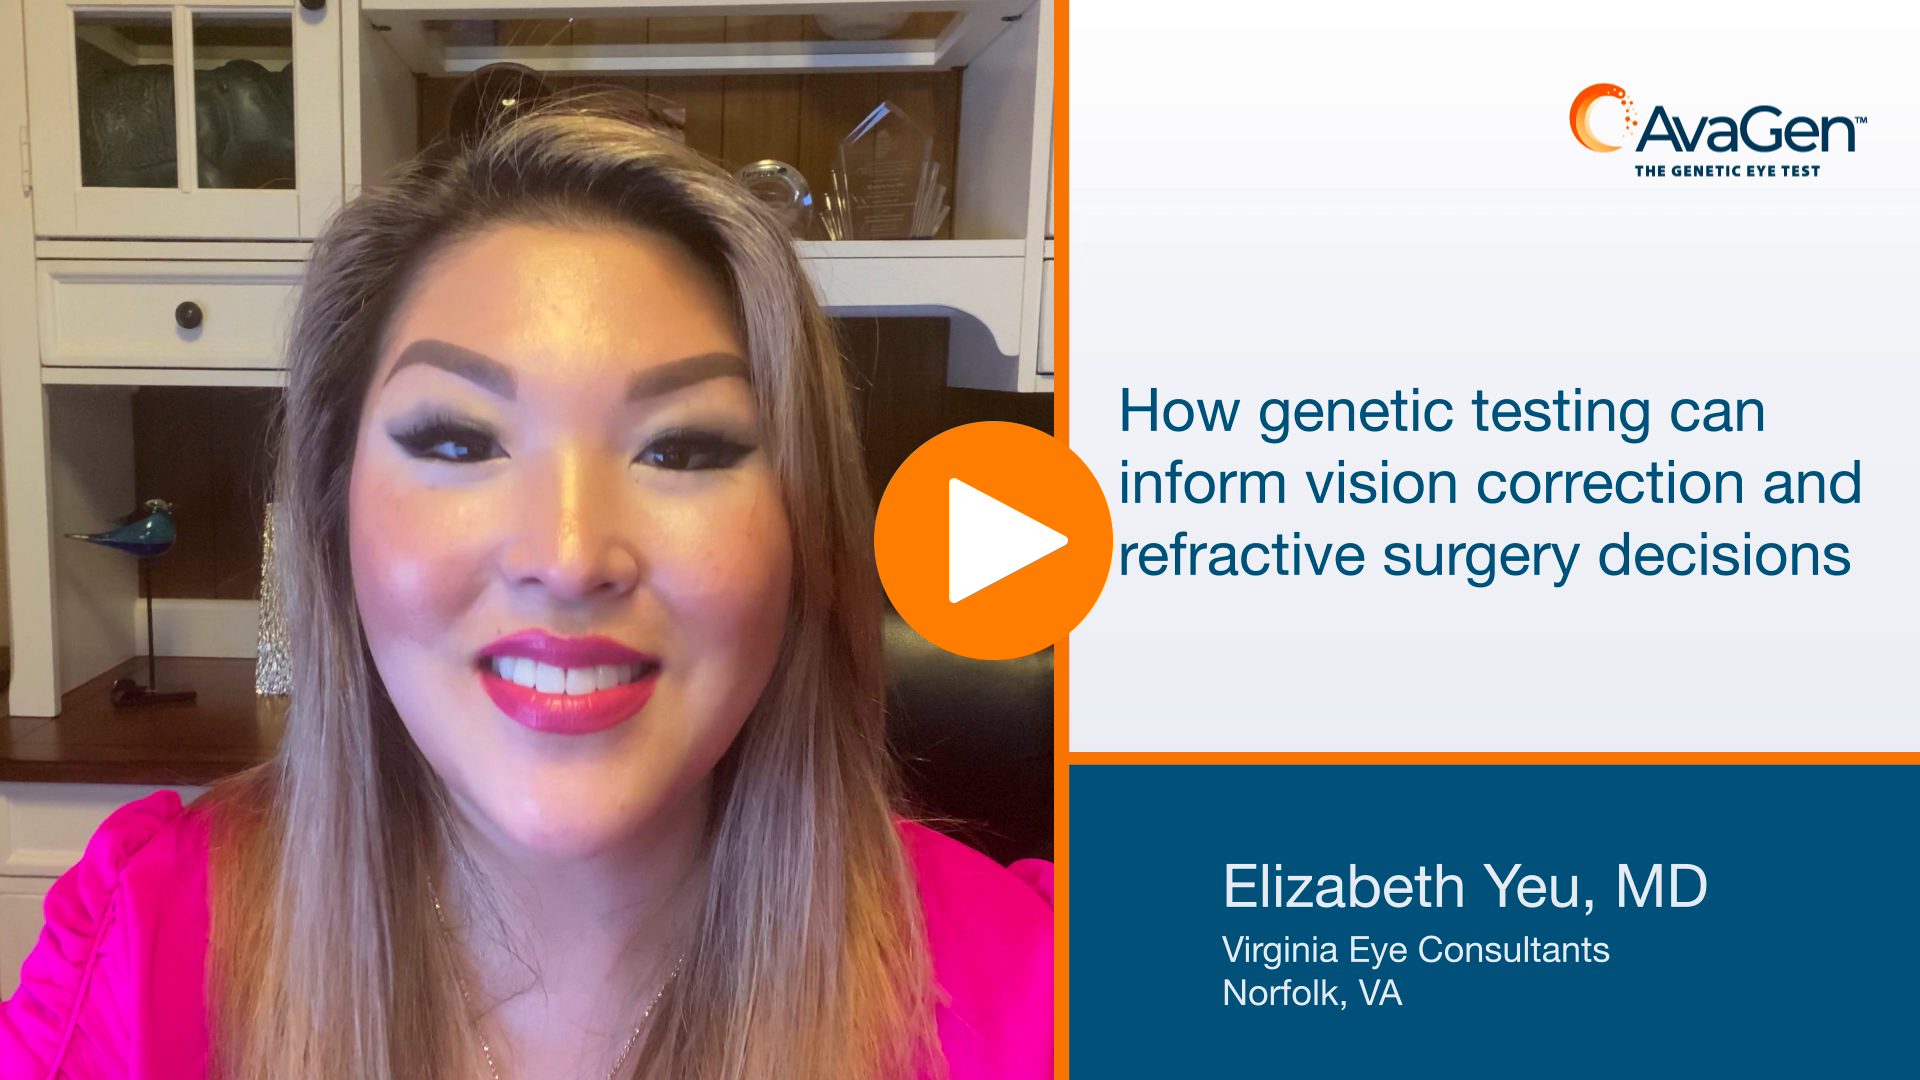 How genetic testing can inform vision correction and refractive surgery decisions